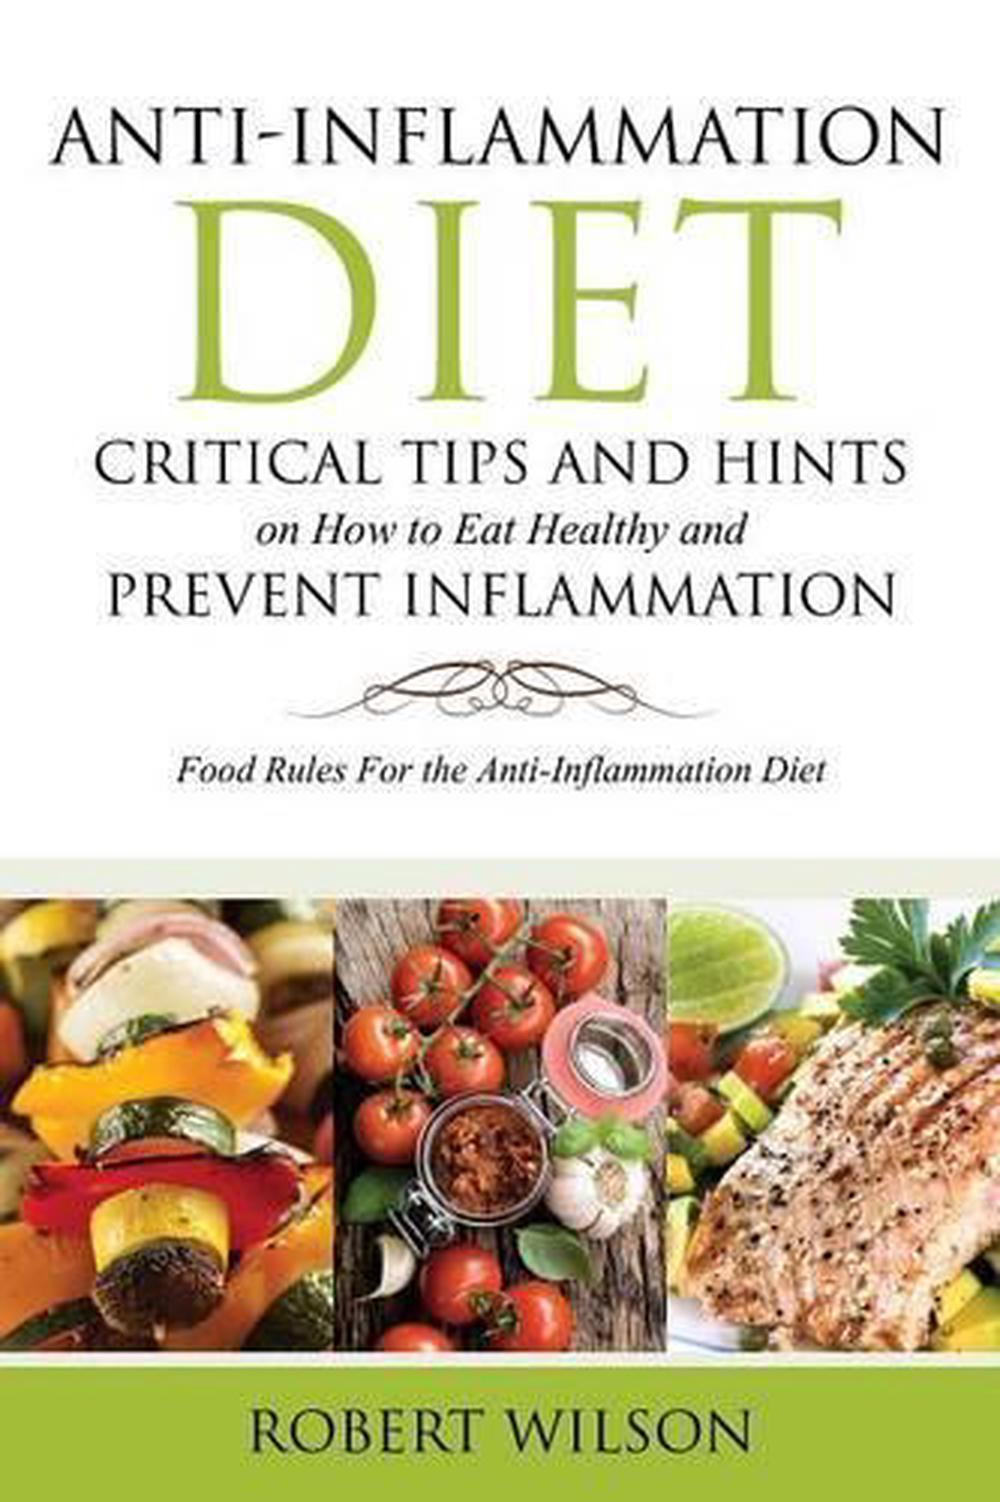 Anti- Inflammation Diet Critical Tips and Hints on How to Eat Healthy 